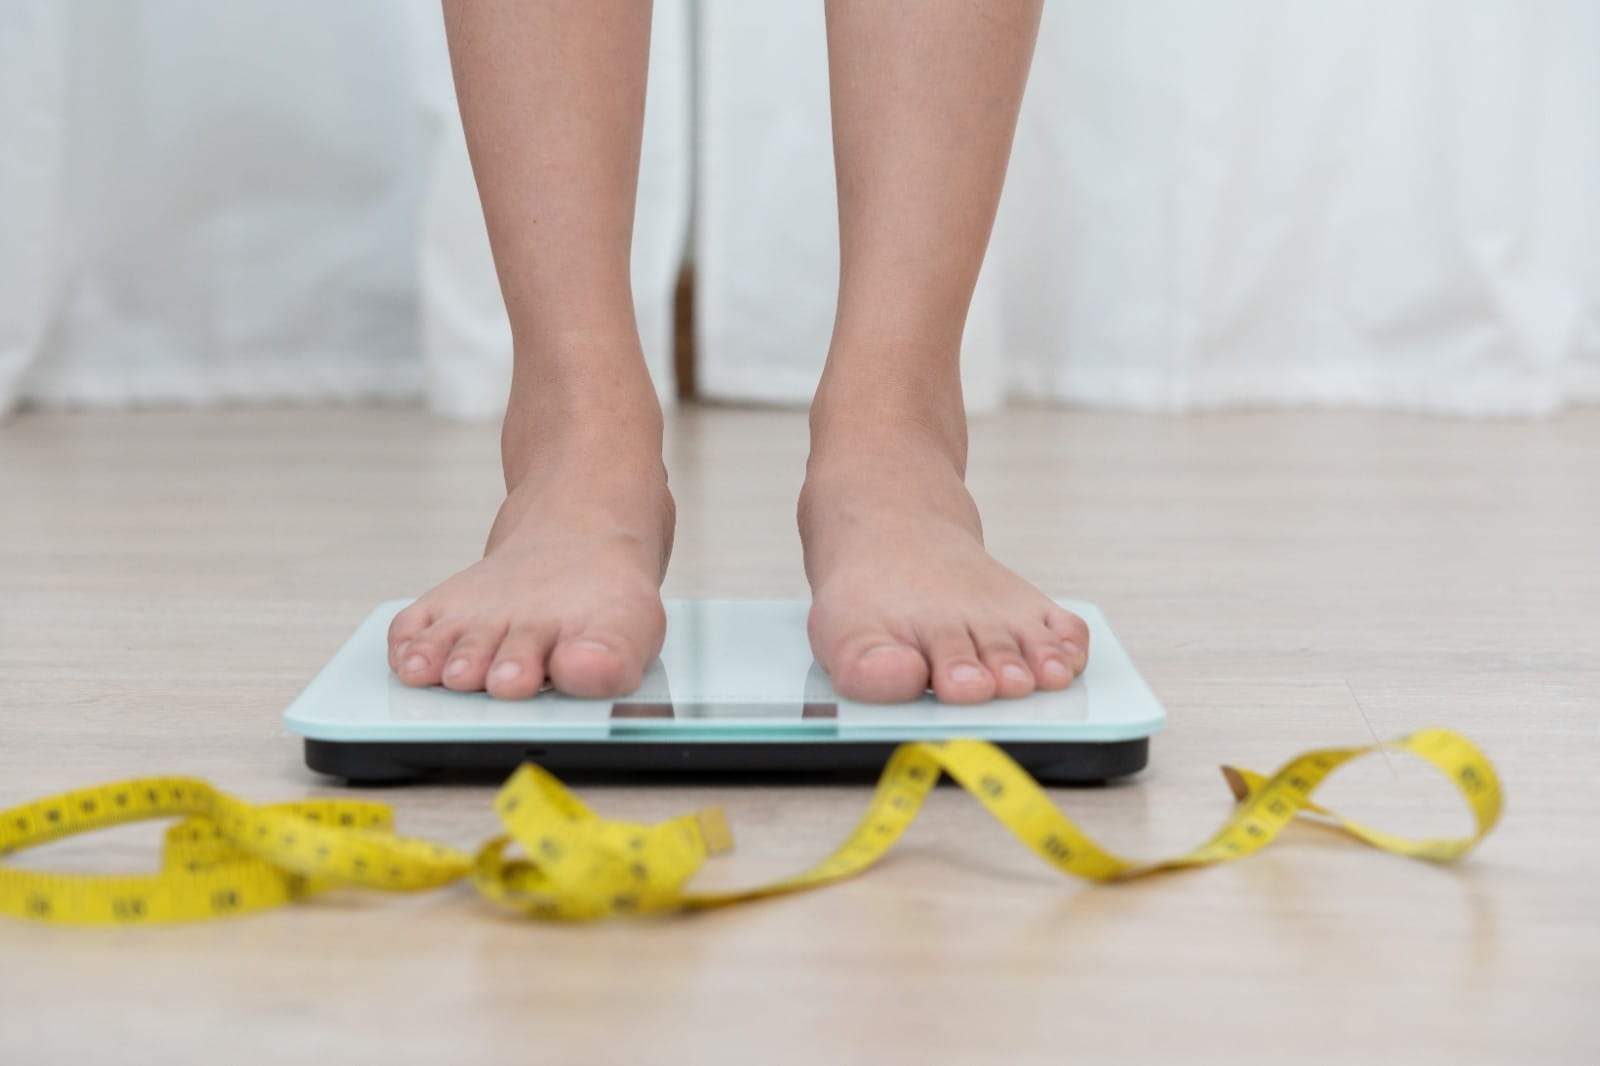 Strategies to break through weight loss plateaus